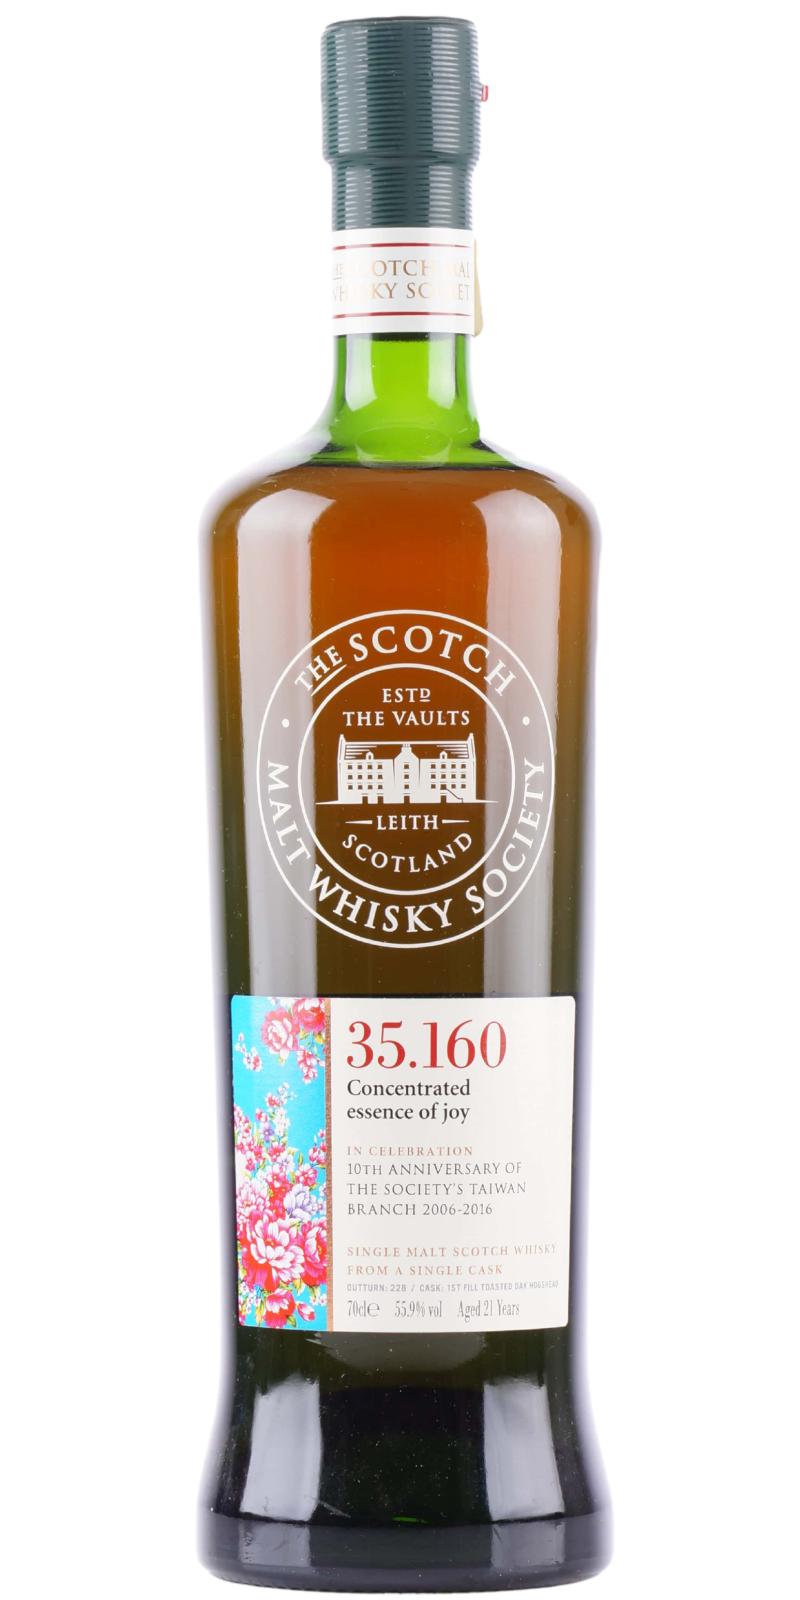 Glen Moray 21yo SMWS 35.160 Concentrater essence of joy 1st Fill Toasted Oak Hogshead 35.160 10th Anniversary of the Society's Taiwan Branch 2006 2016 55.9% 700ml